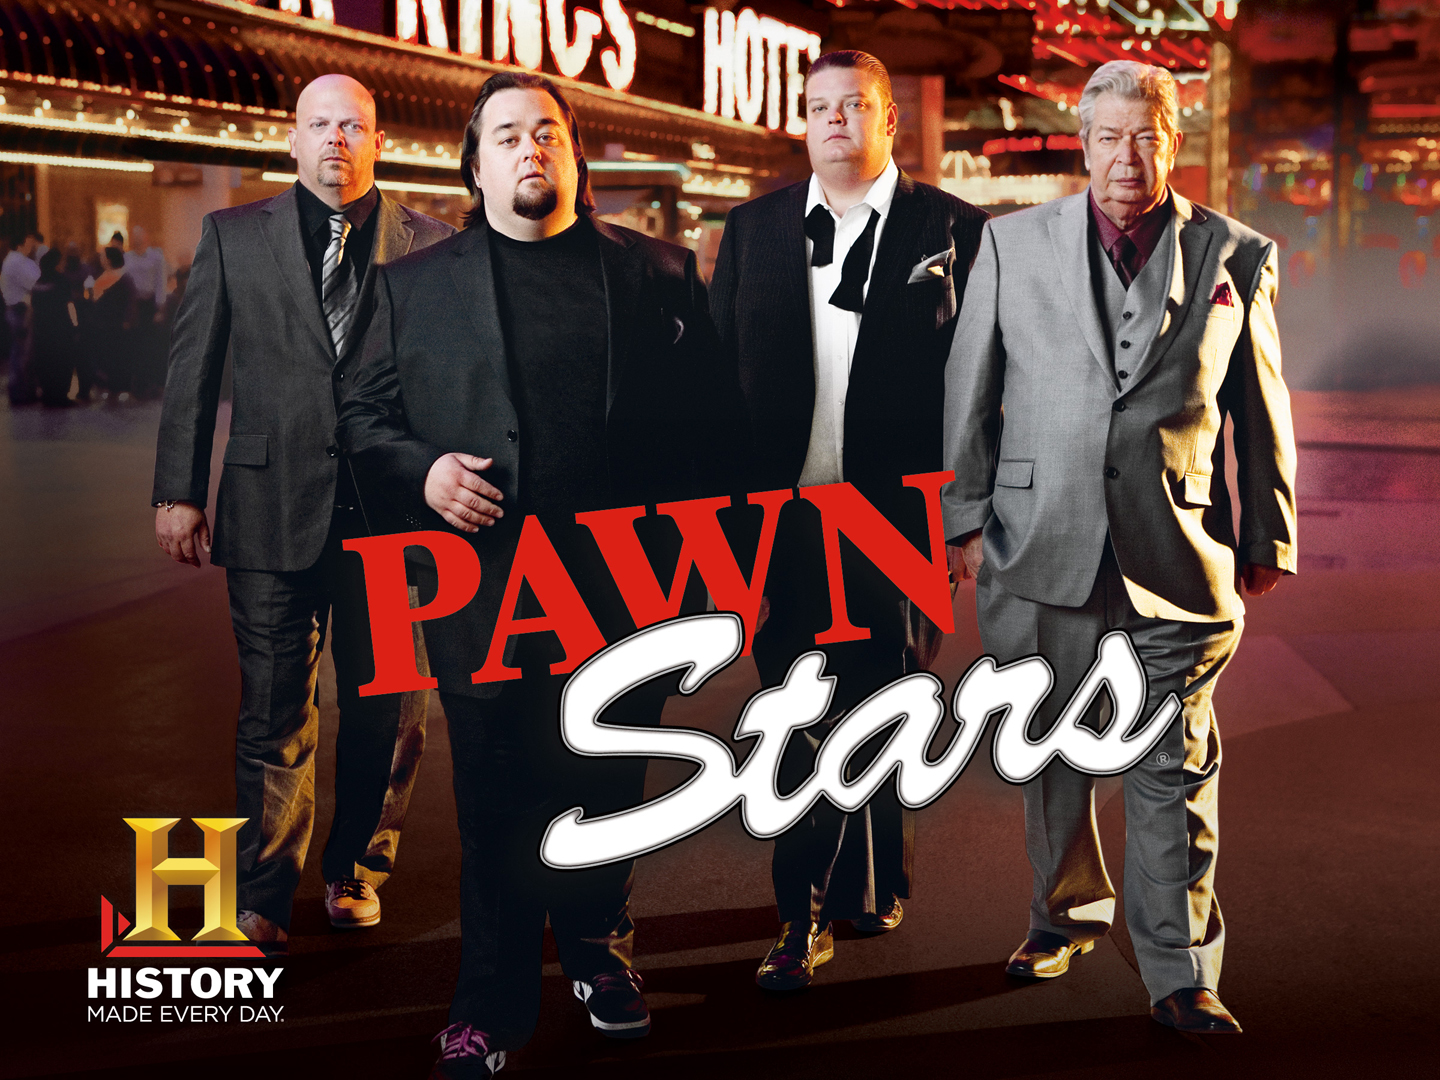 abhineet das recommends Free Pawn Stars Full Episodes